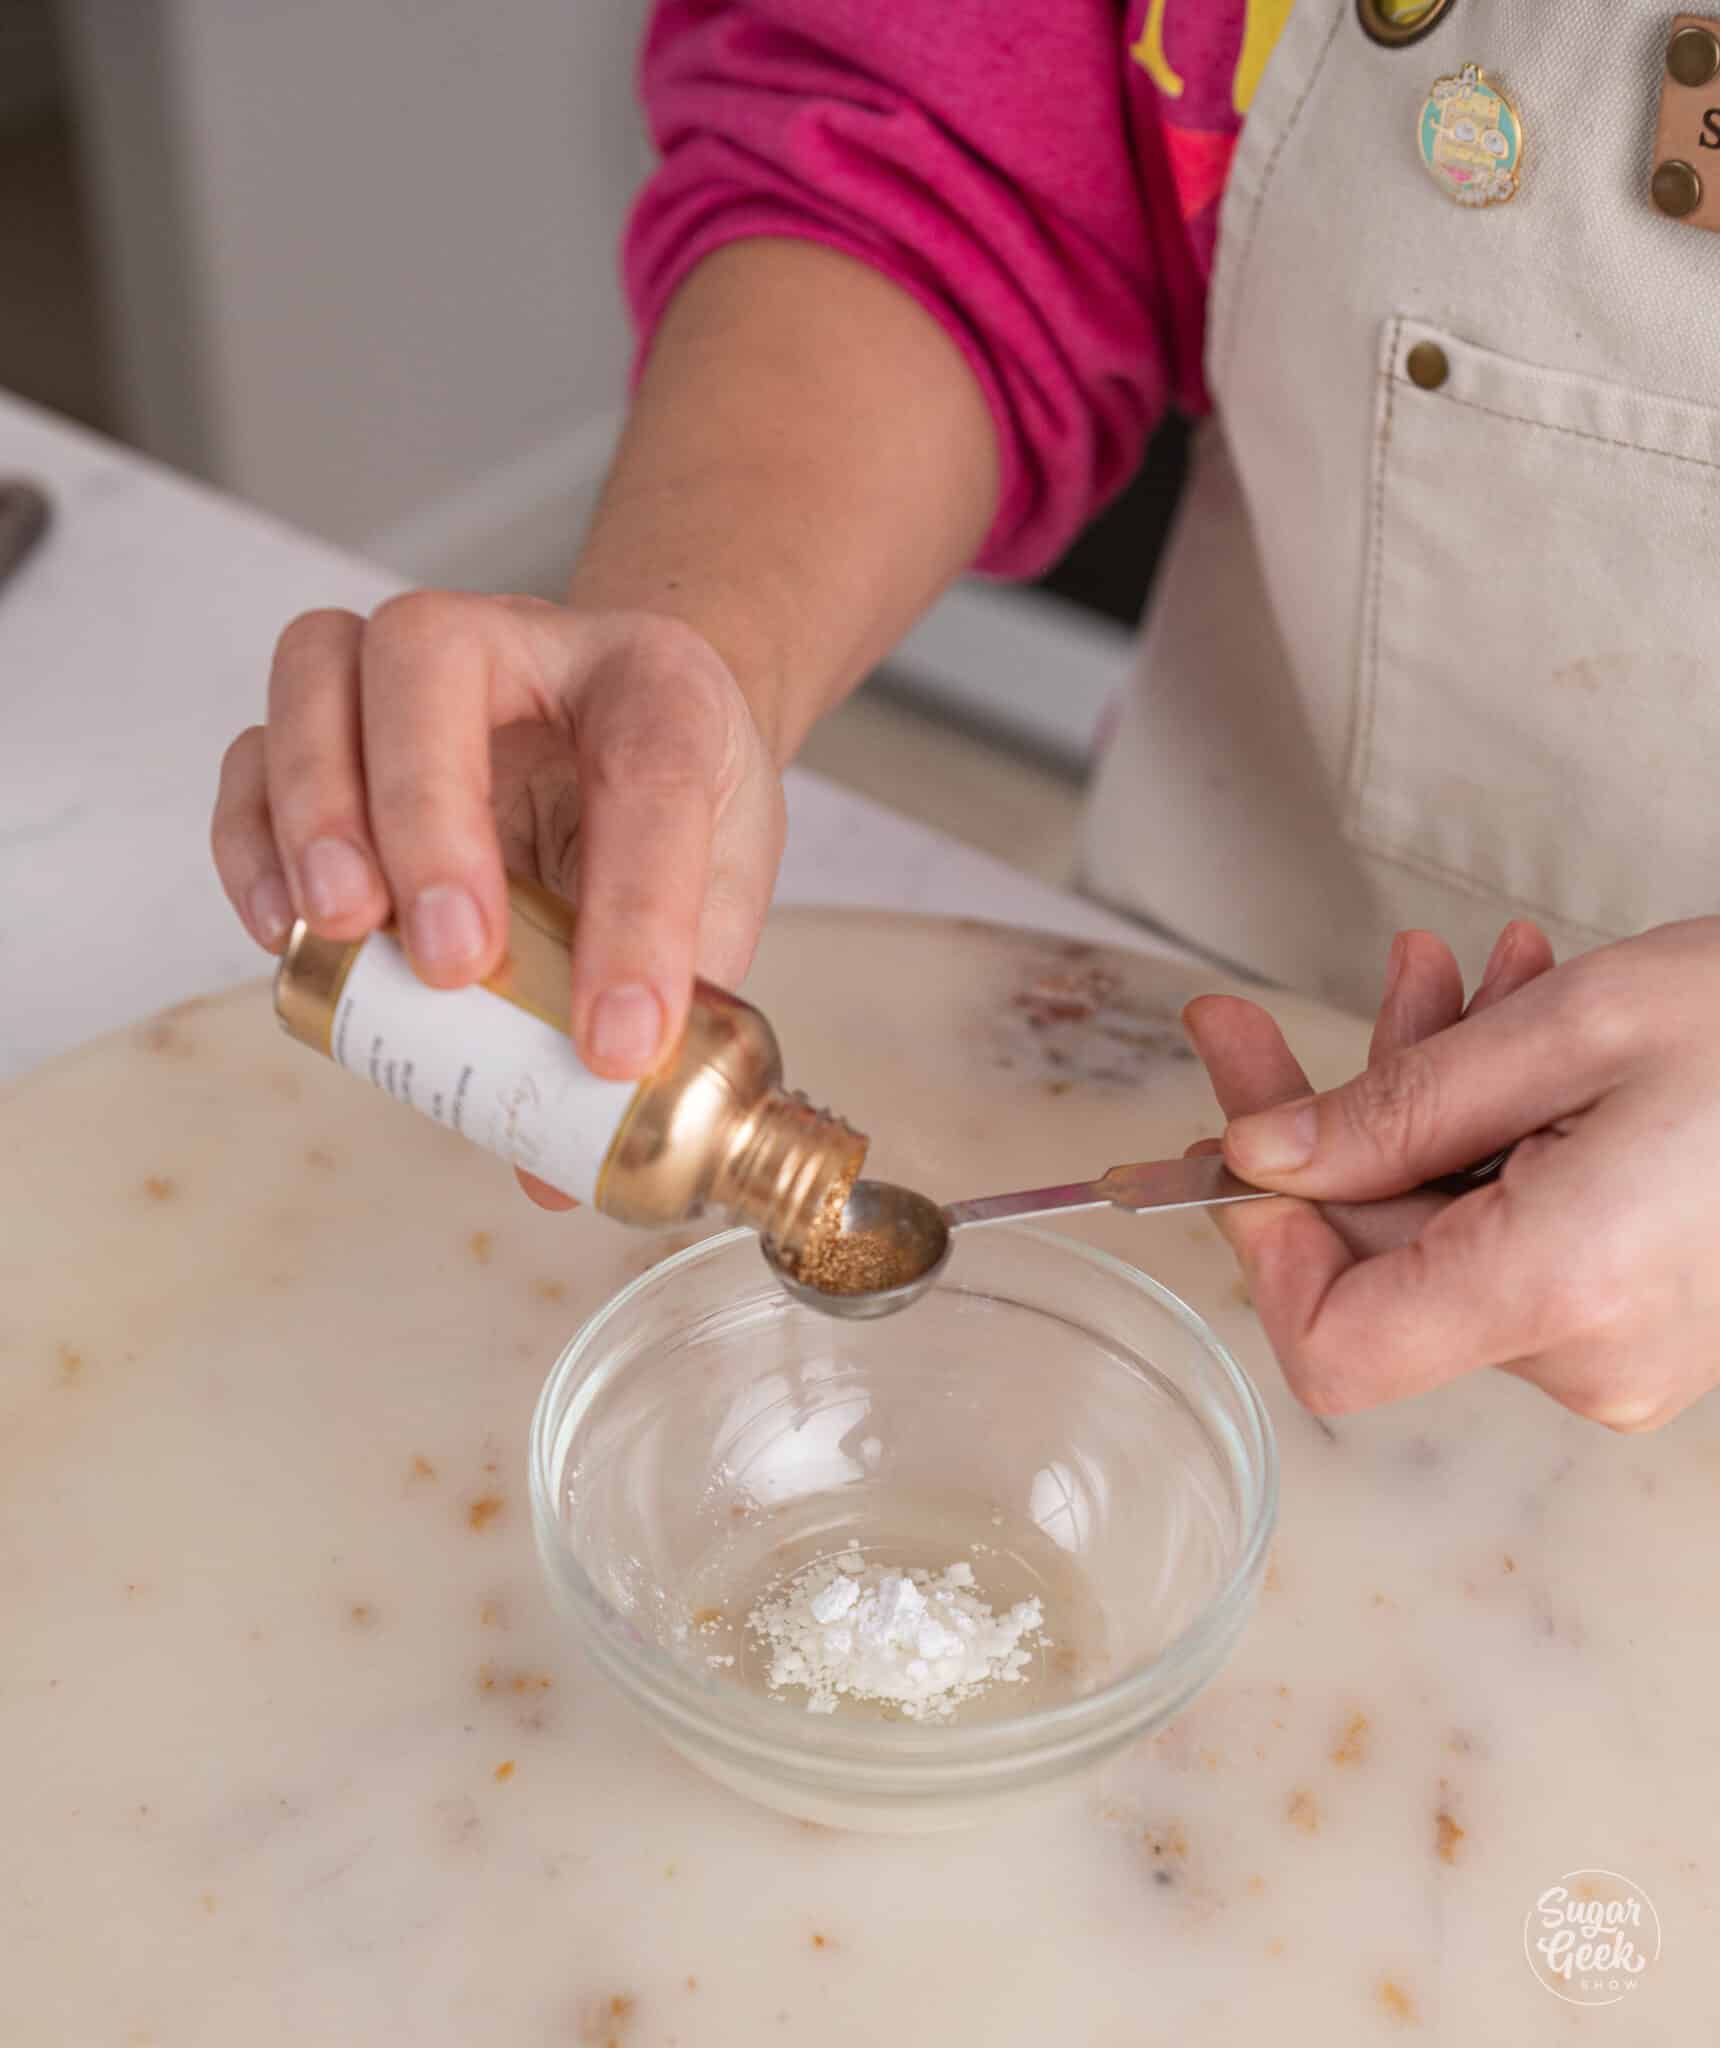 hands measuring out gold dust into a small glass bowl